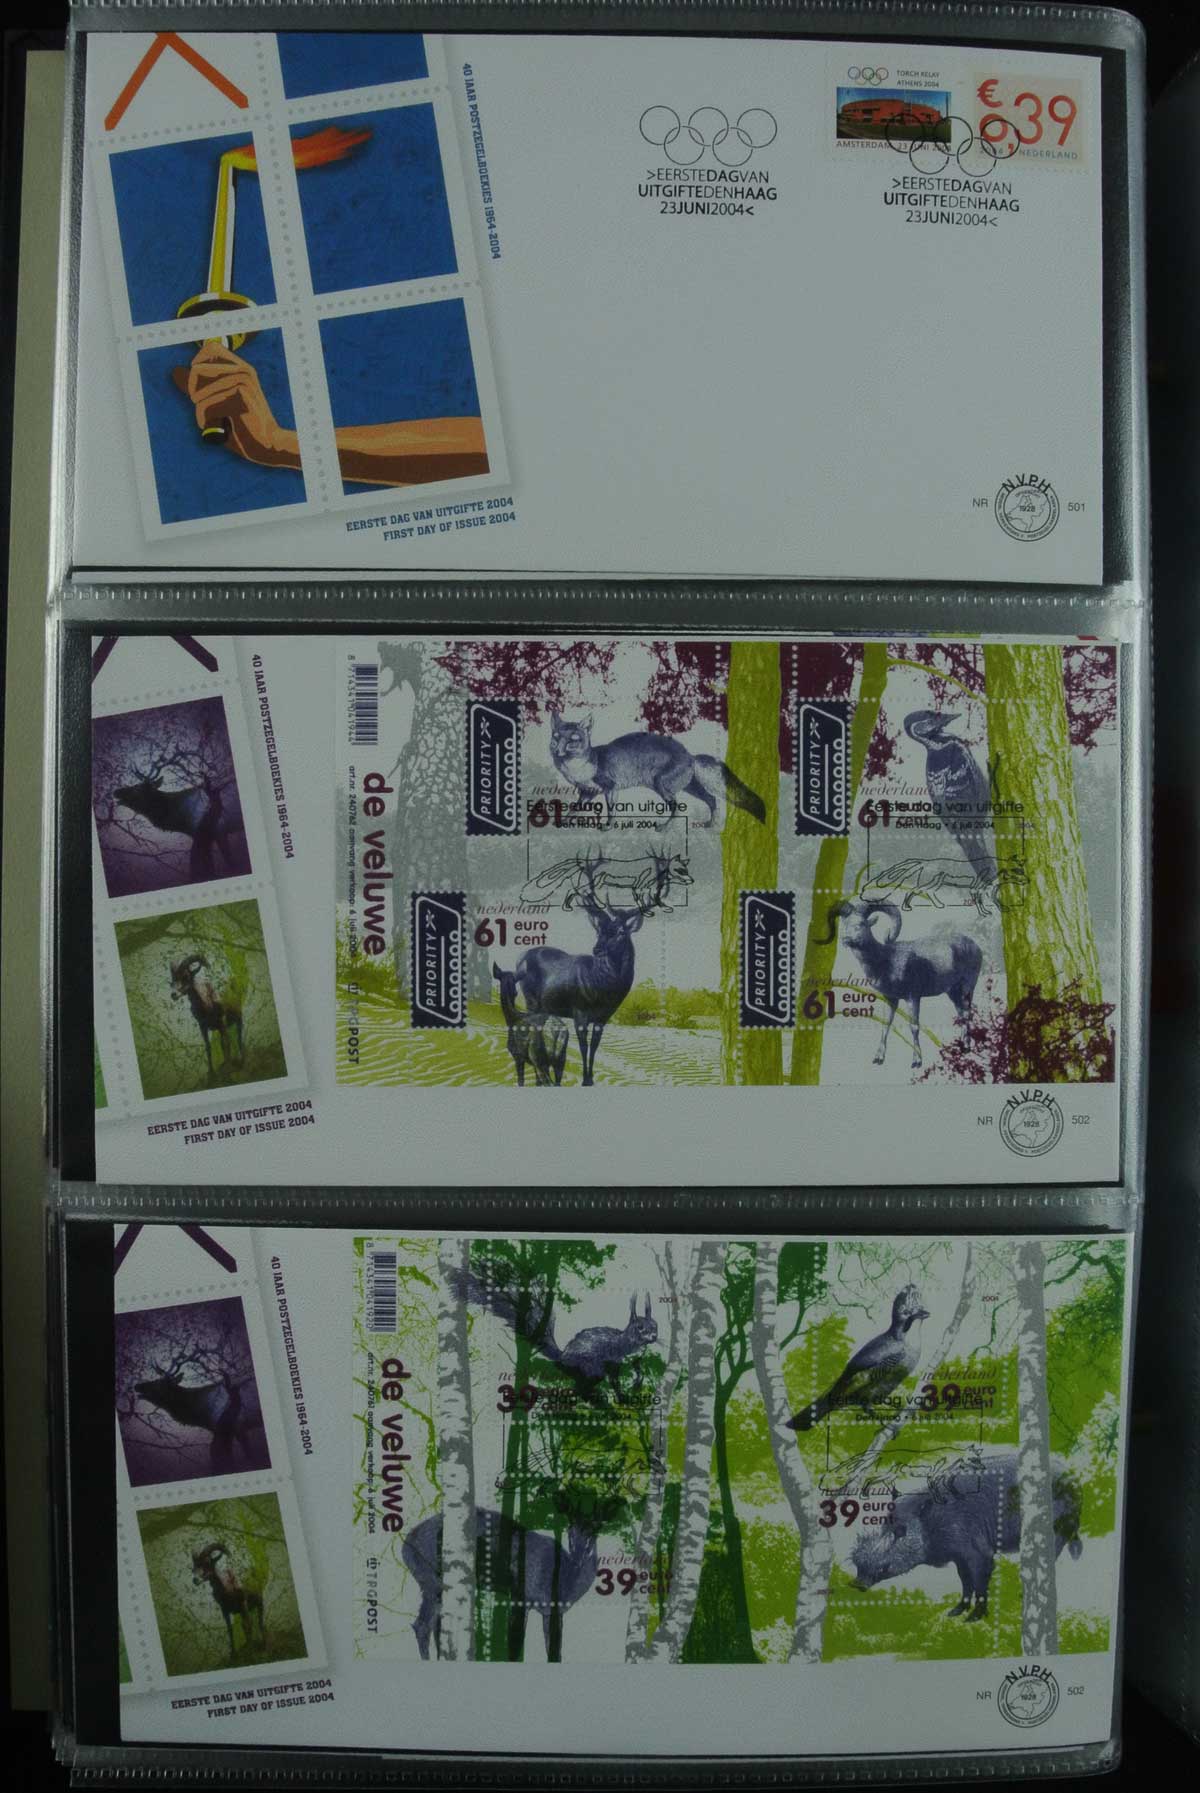 26836 070 - 26836 Netherlands FDC's 1995-2012.